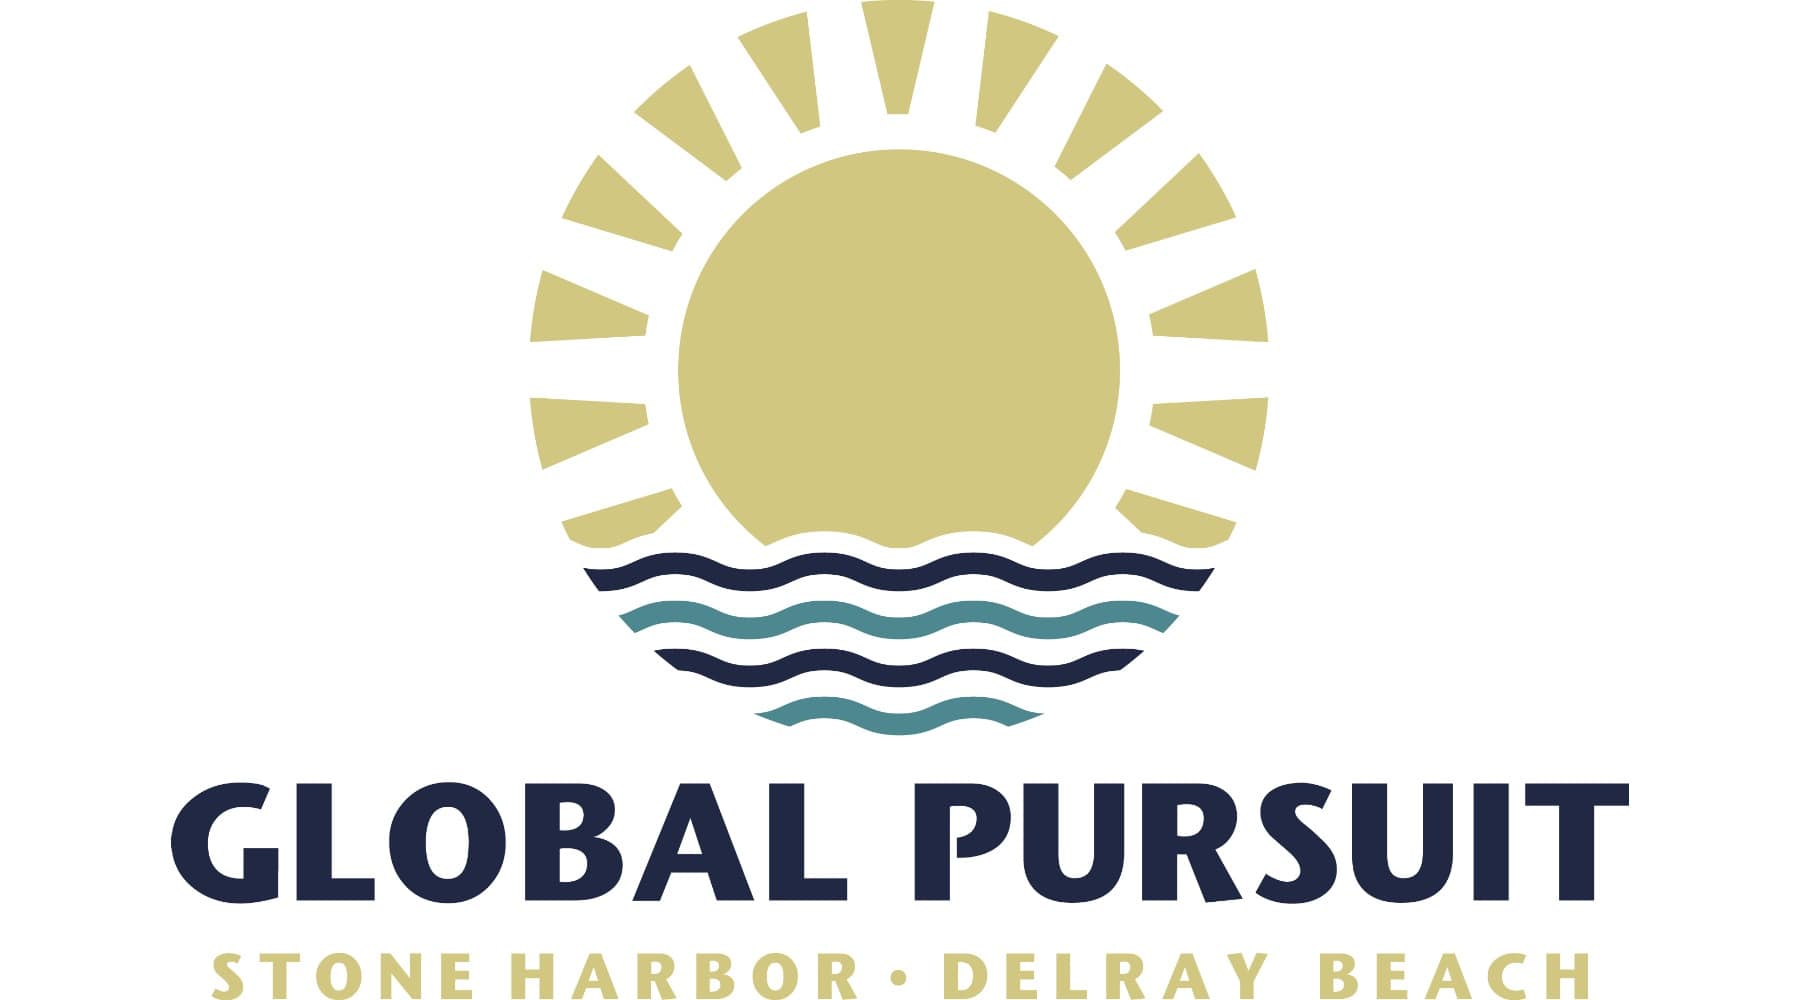 Global Pursuit of Delray, Delray Beach Florida Men's Clothing Store. Peter Millar, Smathers and Branson, Vineyard Vines, Patagonia